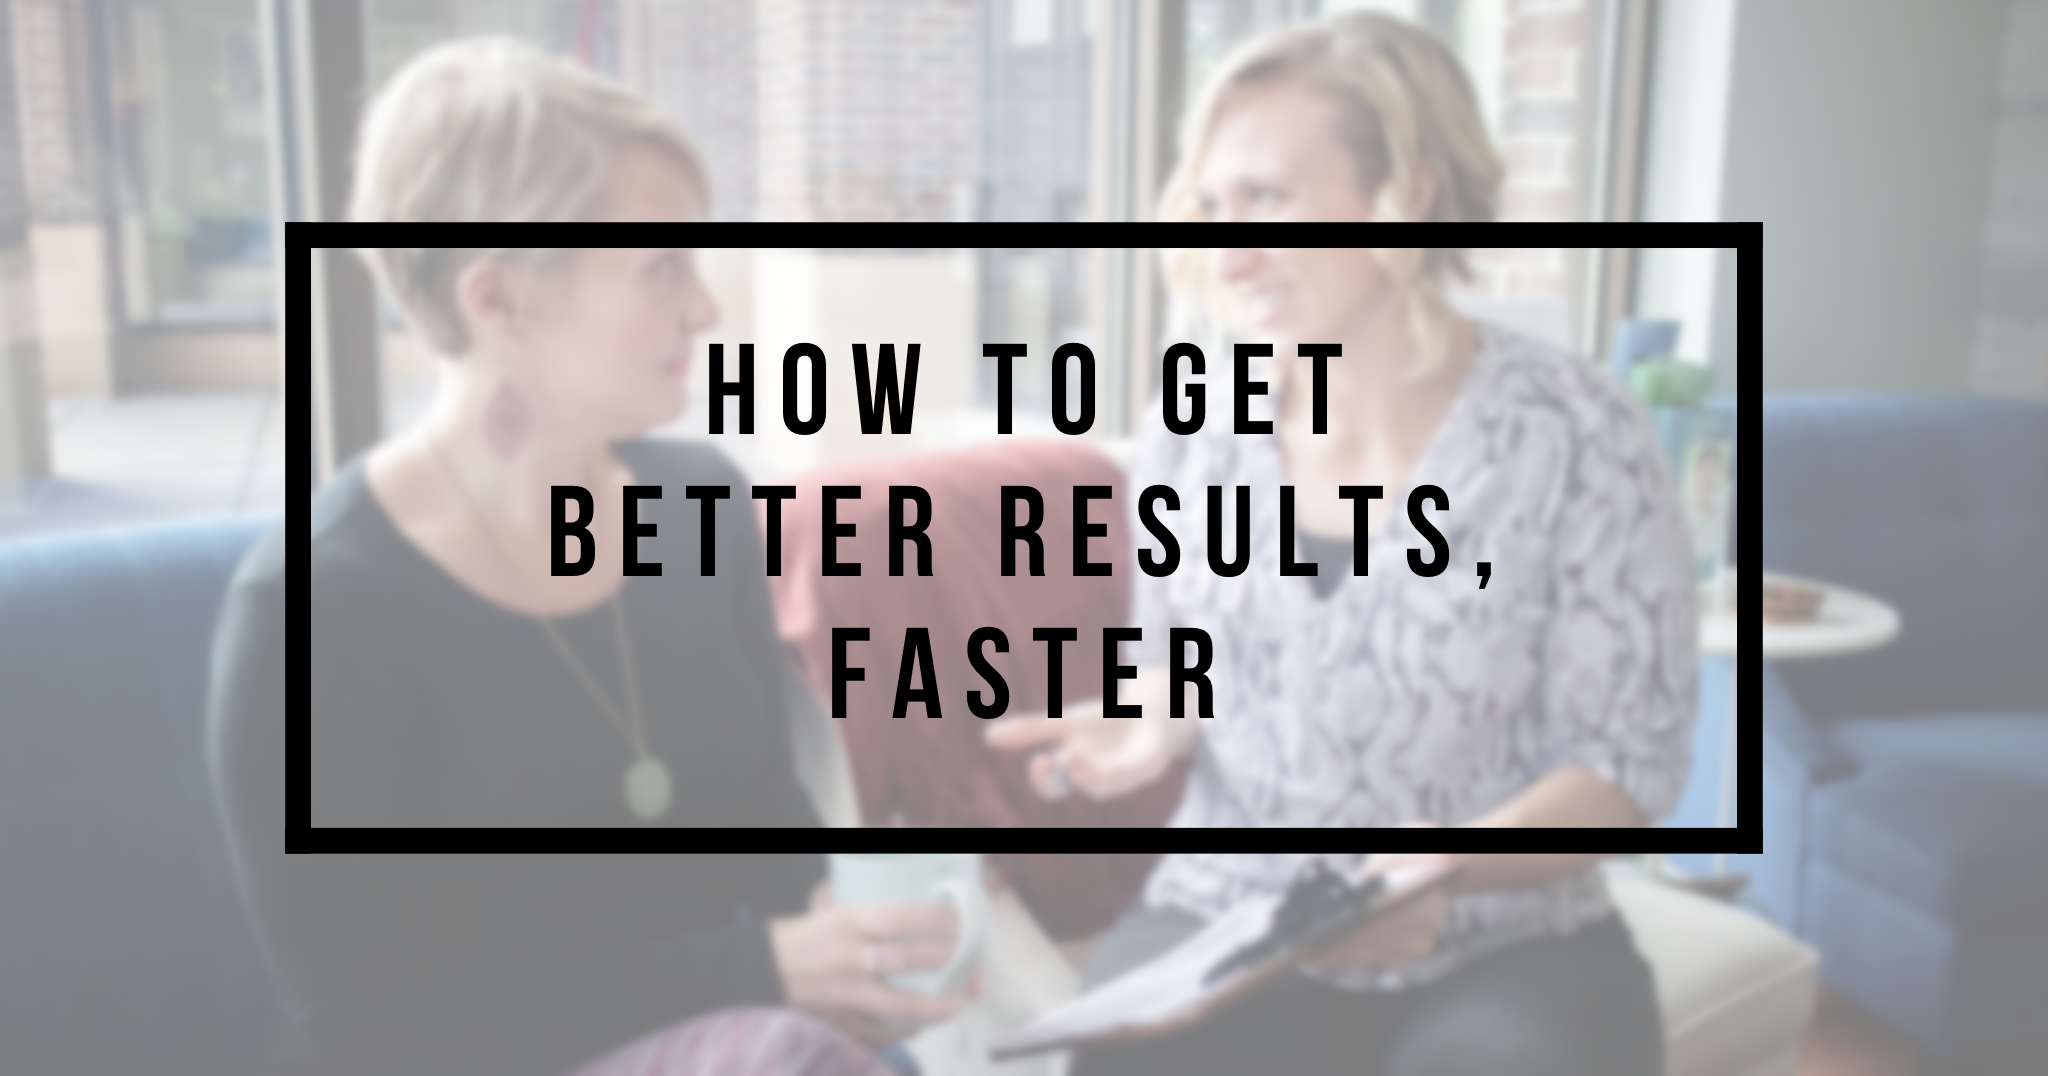 How to get BETTER results, FASTER